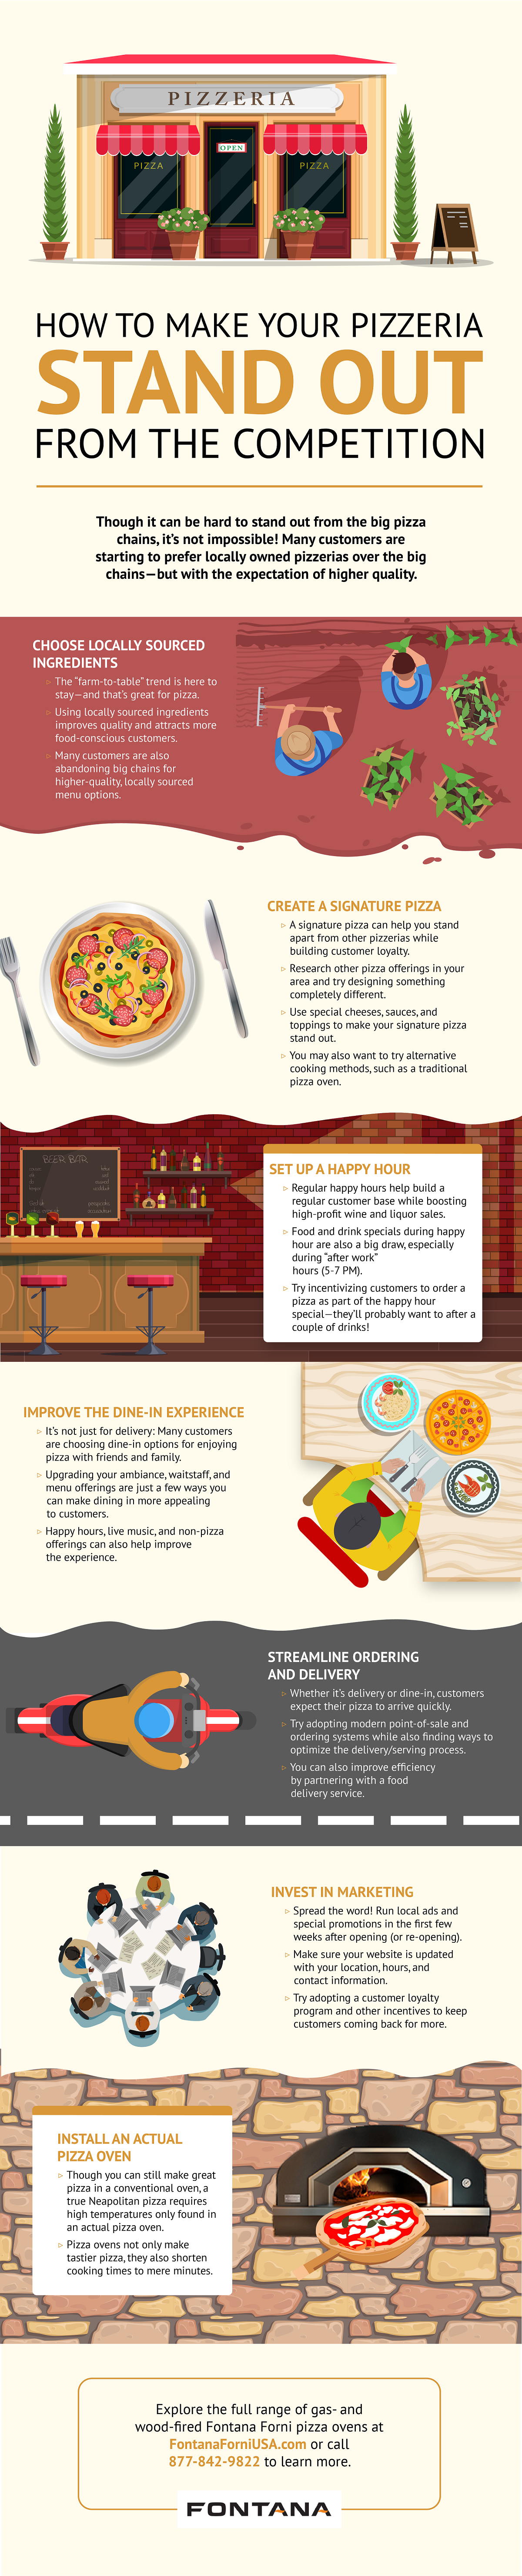 How to Make Your Pizzeria Stand Out from the Competition Infographic